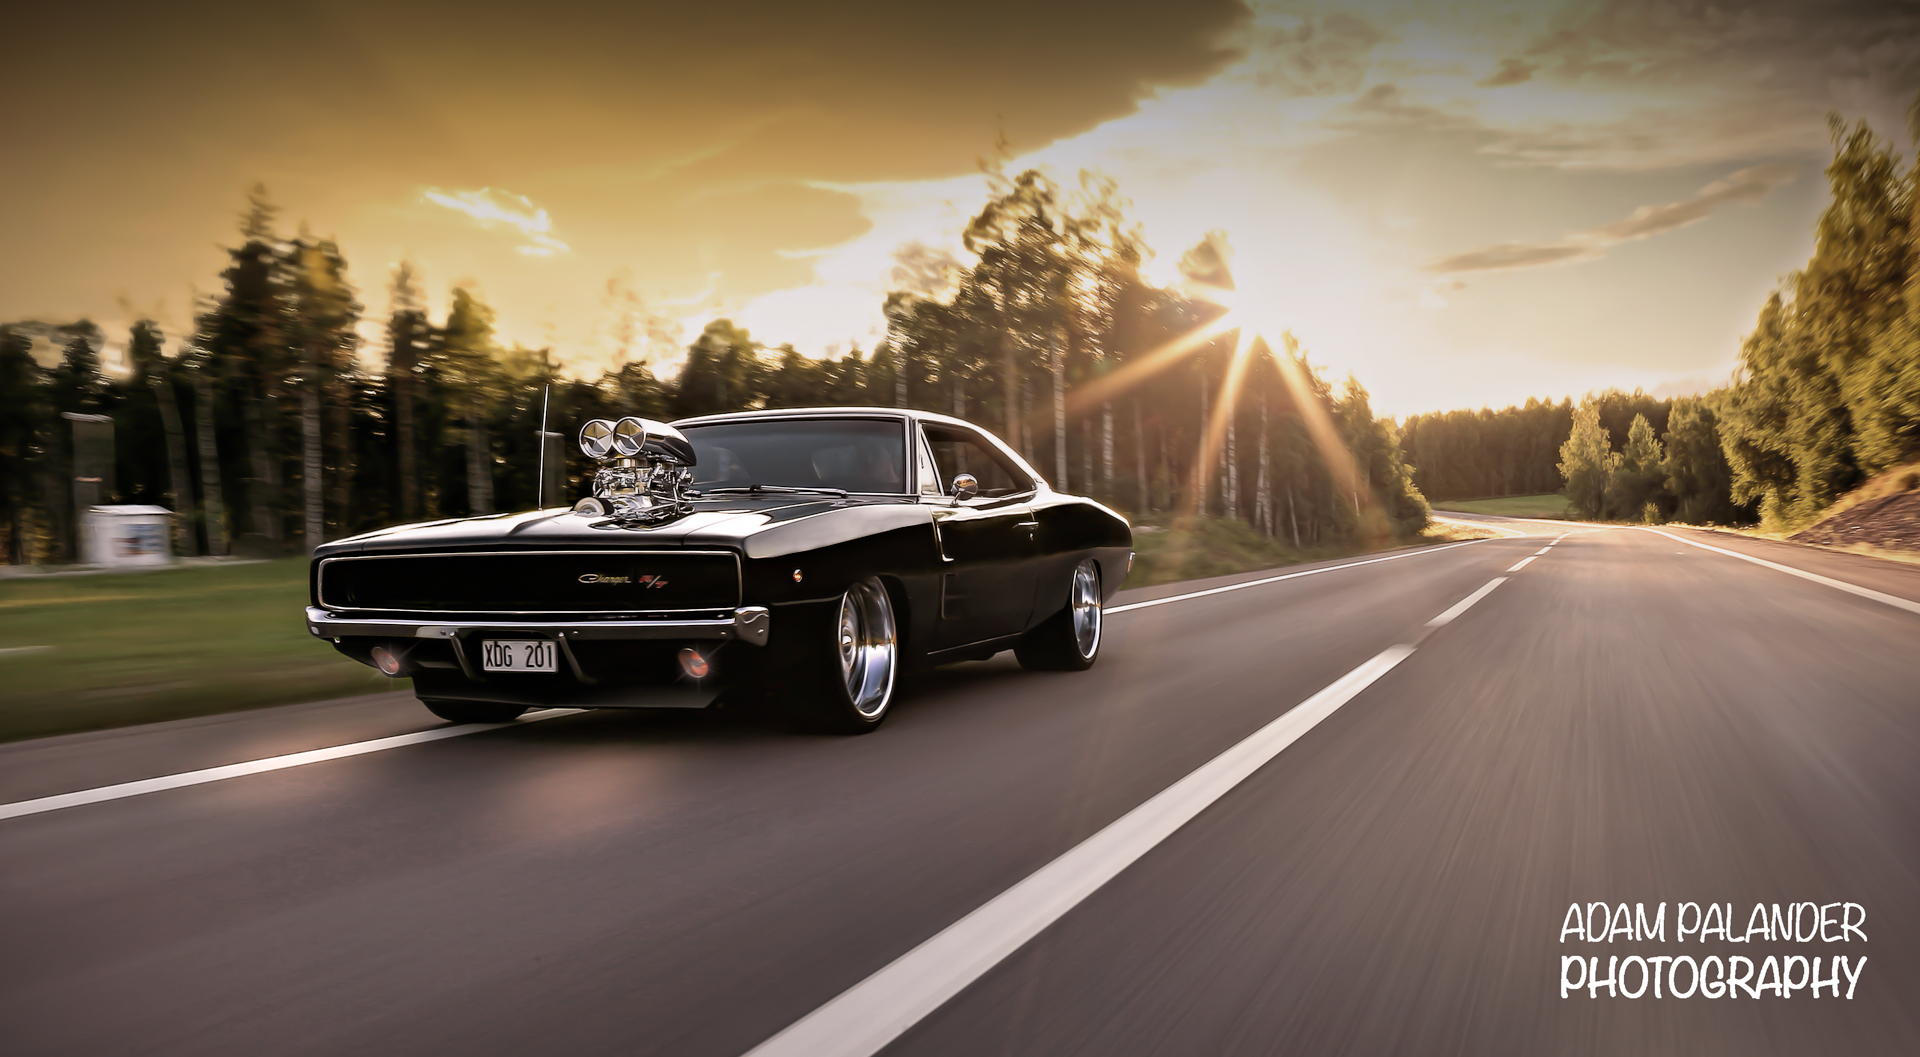 Sports Cars images 1968 Dodge Charger HD wallpaper and background